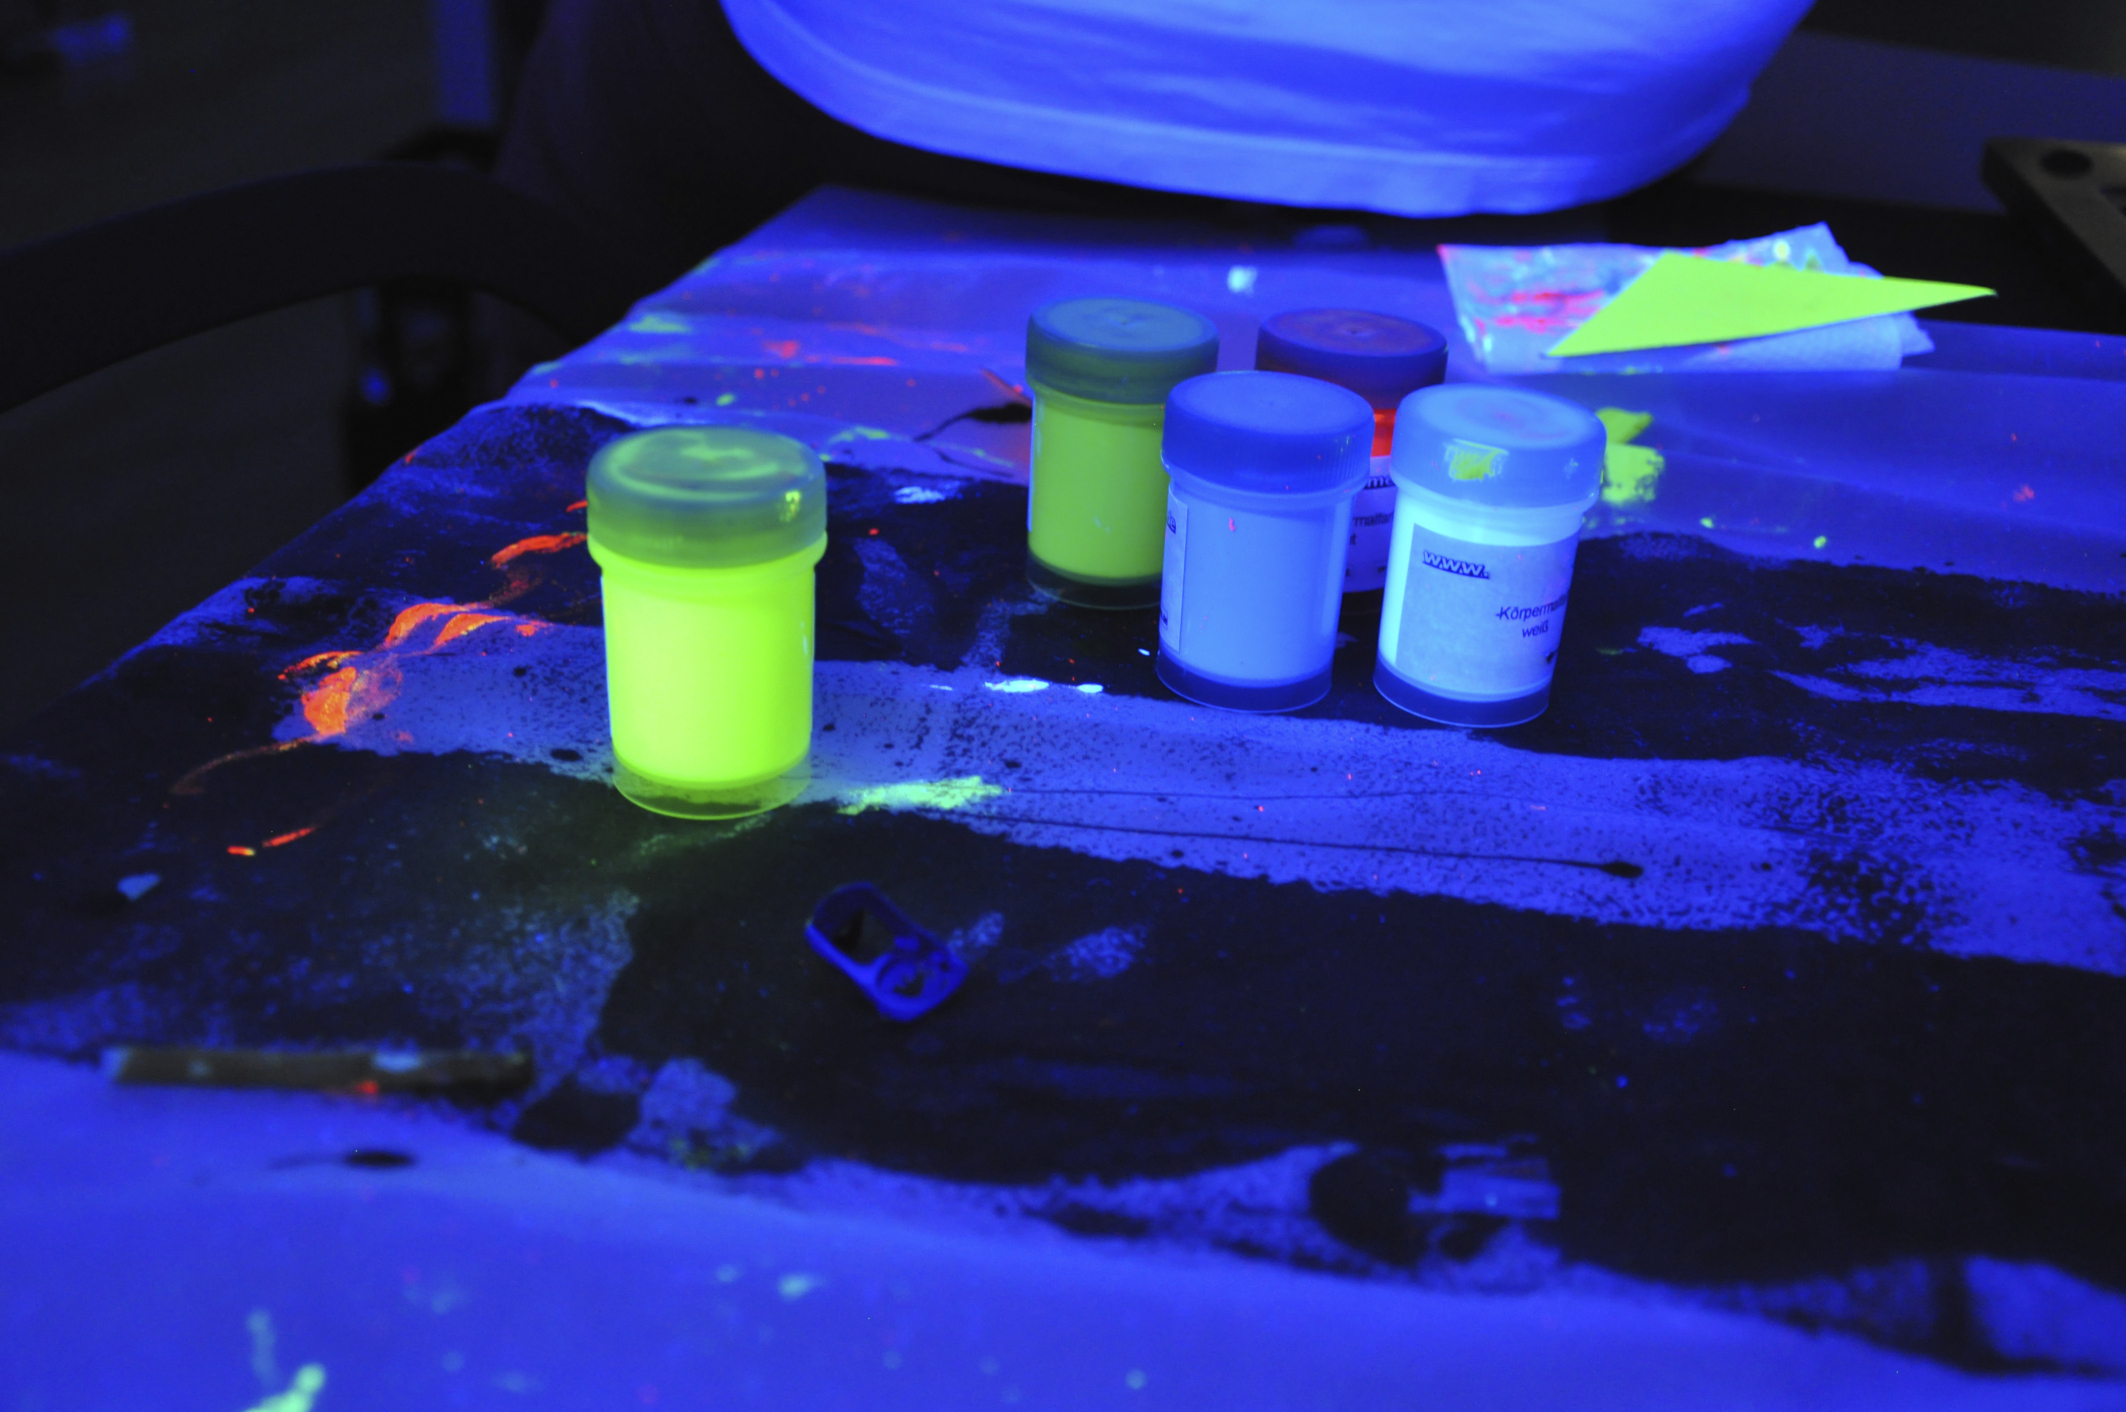 251) How to mix paints for acrylic pouring - fluorescent blacklight paints  